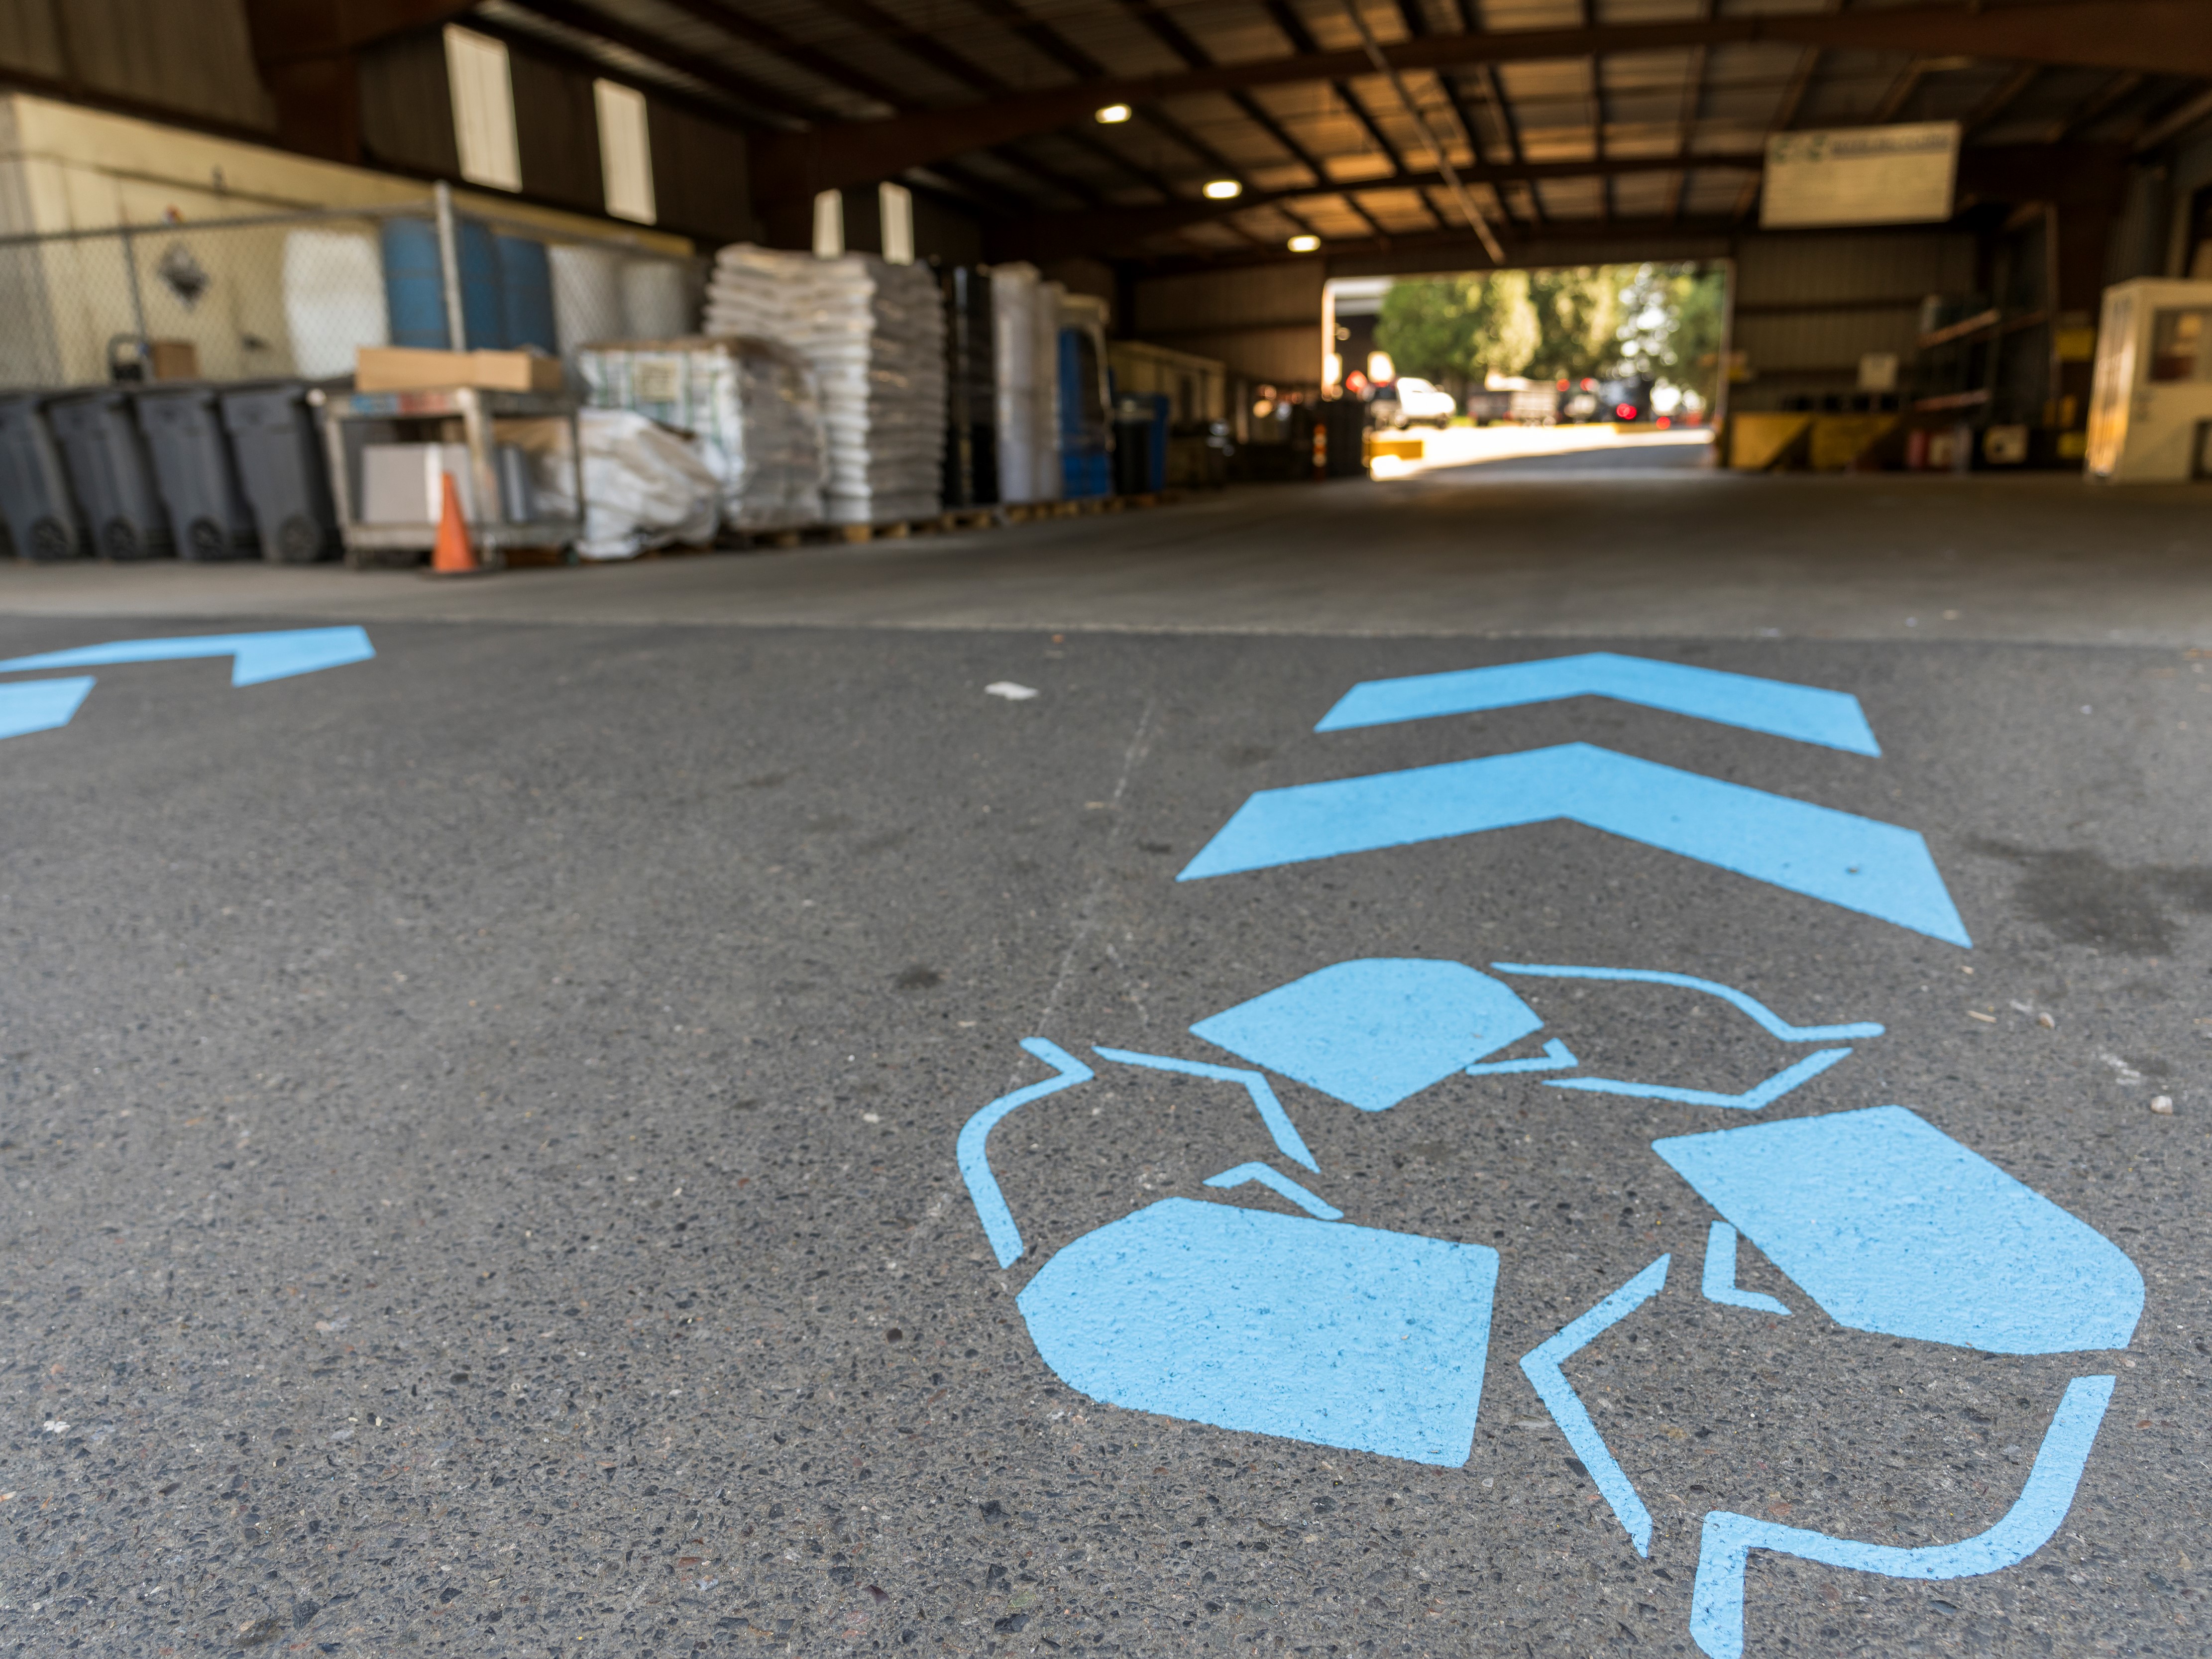 Floor painted recycling symbol and directional arrows